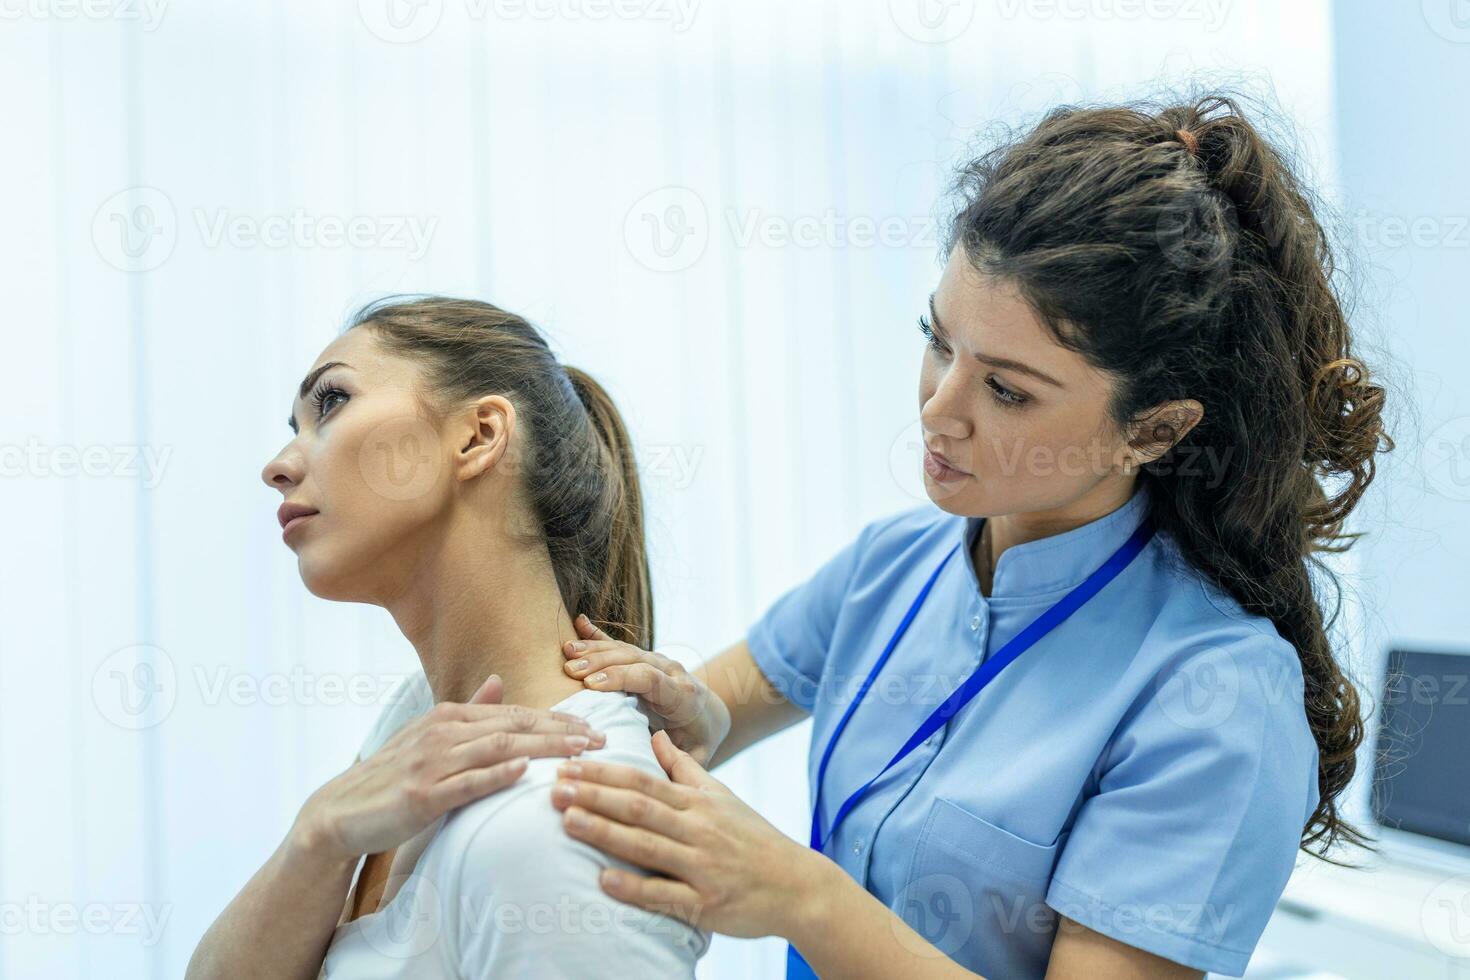 Woman doctor osteopath in medical uniform fixing woman patients shoulder and back joints in manual therapy clinic during visit. Professional osteopath during work with patient concept photo